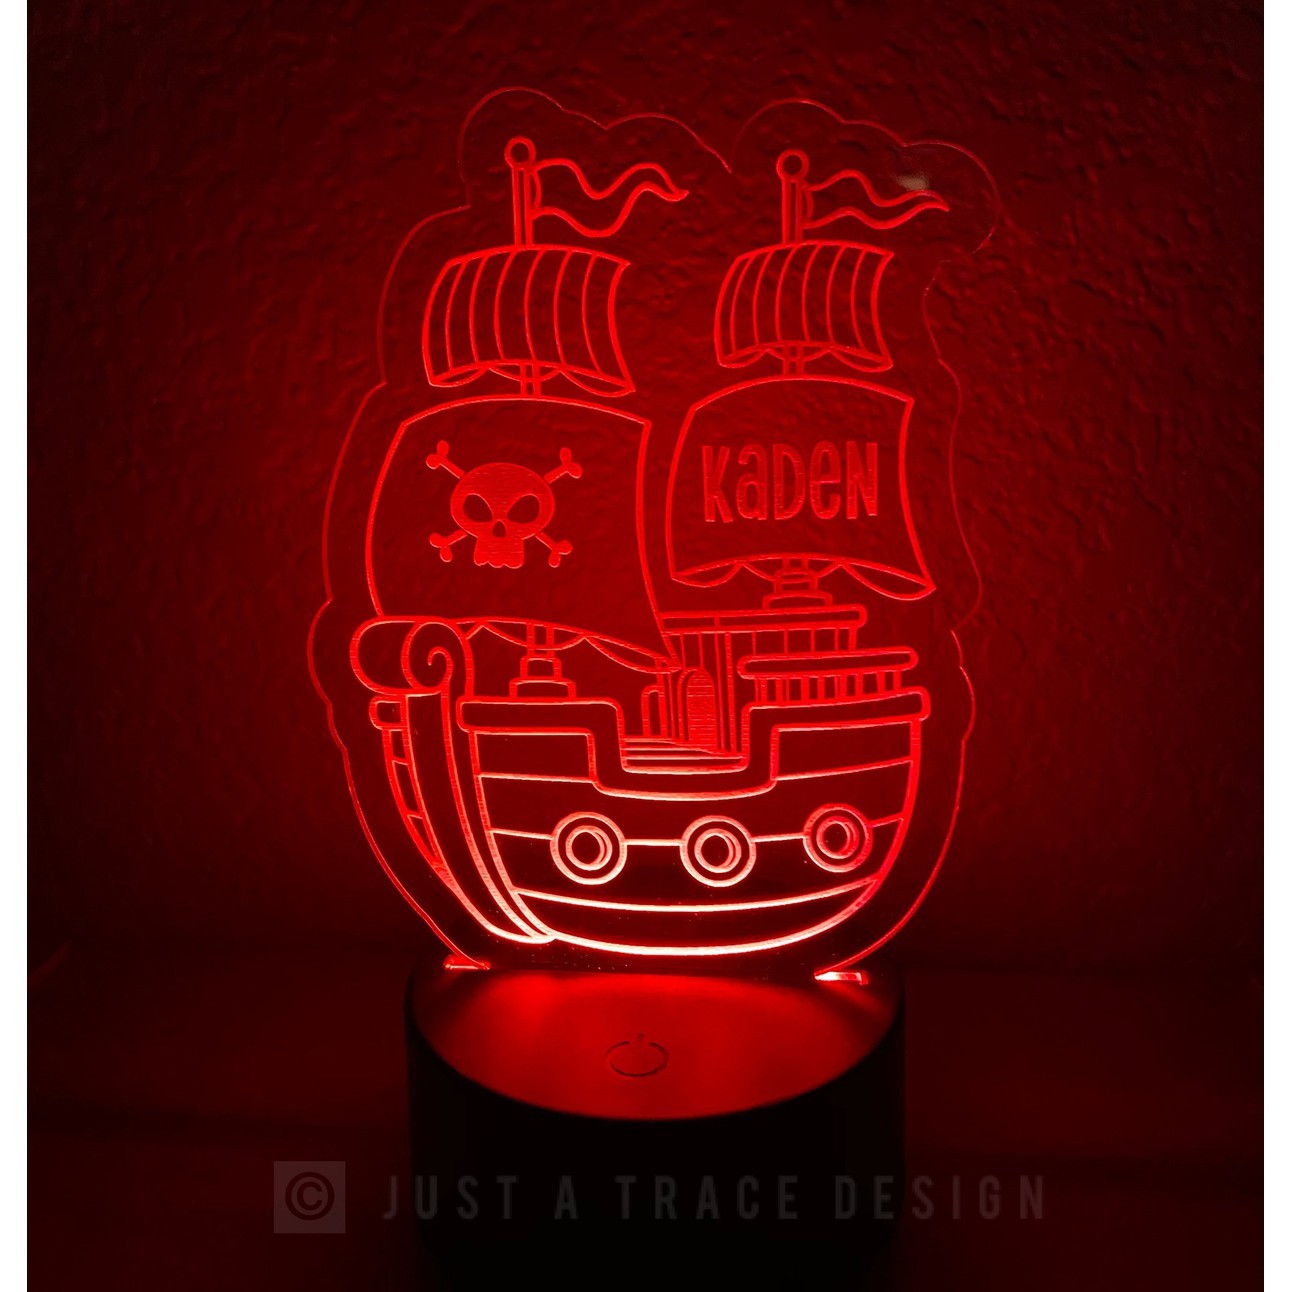 Personalized Pirate Ship Night Light, Kids Night Light, Name Night Light, Acrylic Night Light, Boat Nightlight, Laser Cut and Engraved